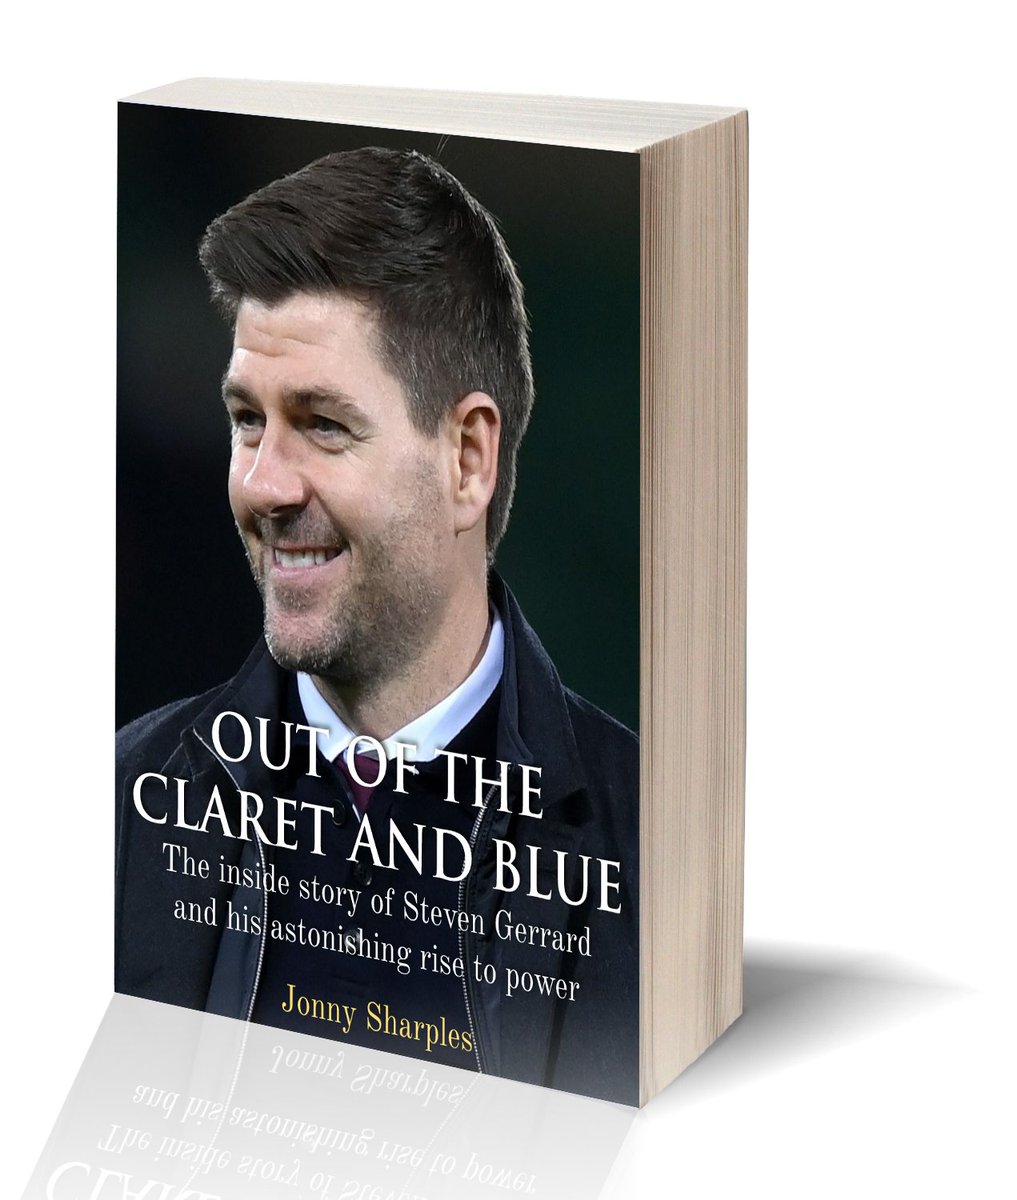 🚨 Delighted to say ‘Out of the Claret and Blue: The inside story of Steven Gerrard and his astonishing rise to power’ by myself will be out for Christmas..